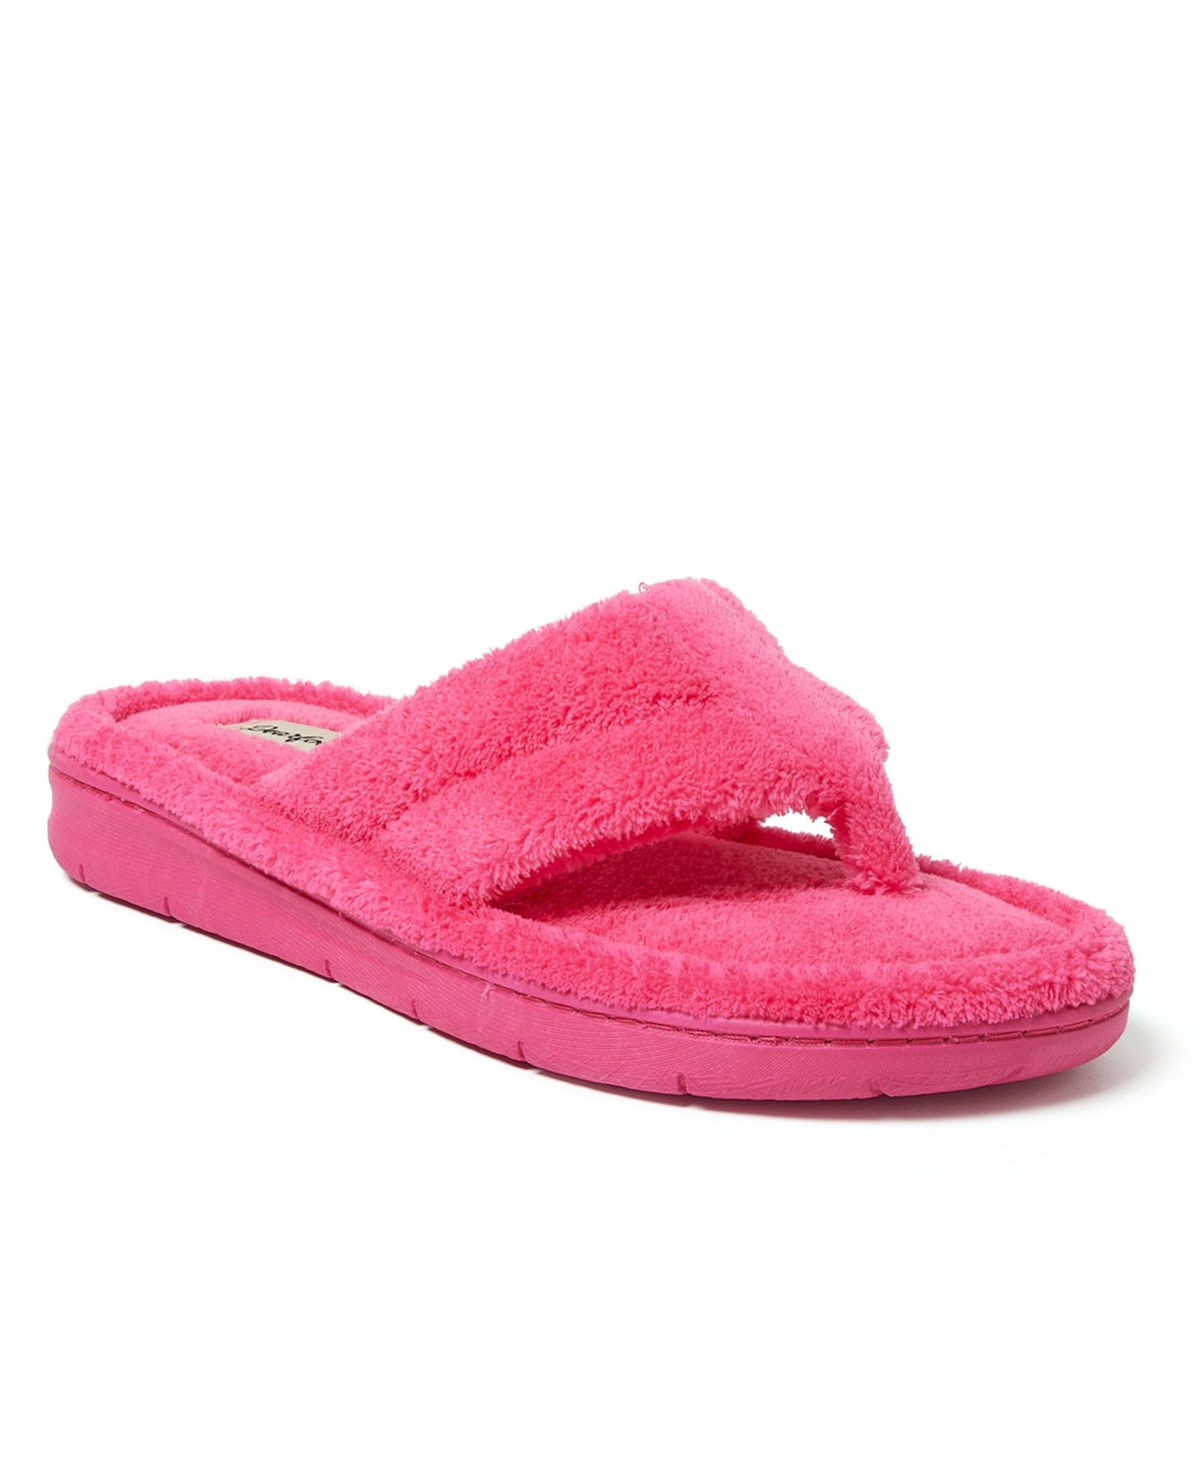 Women's Wrenley Terry Thong Slippers - Paradise Pink